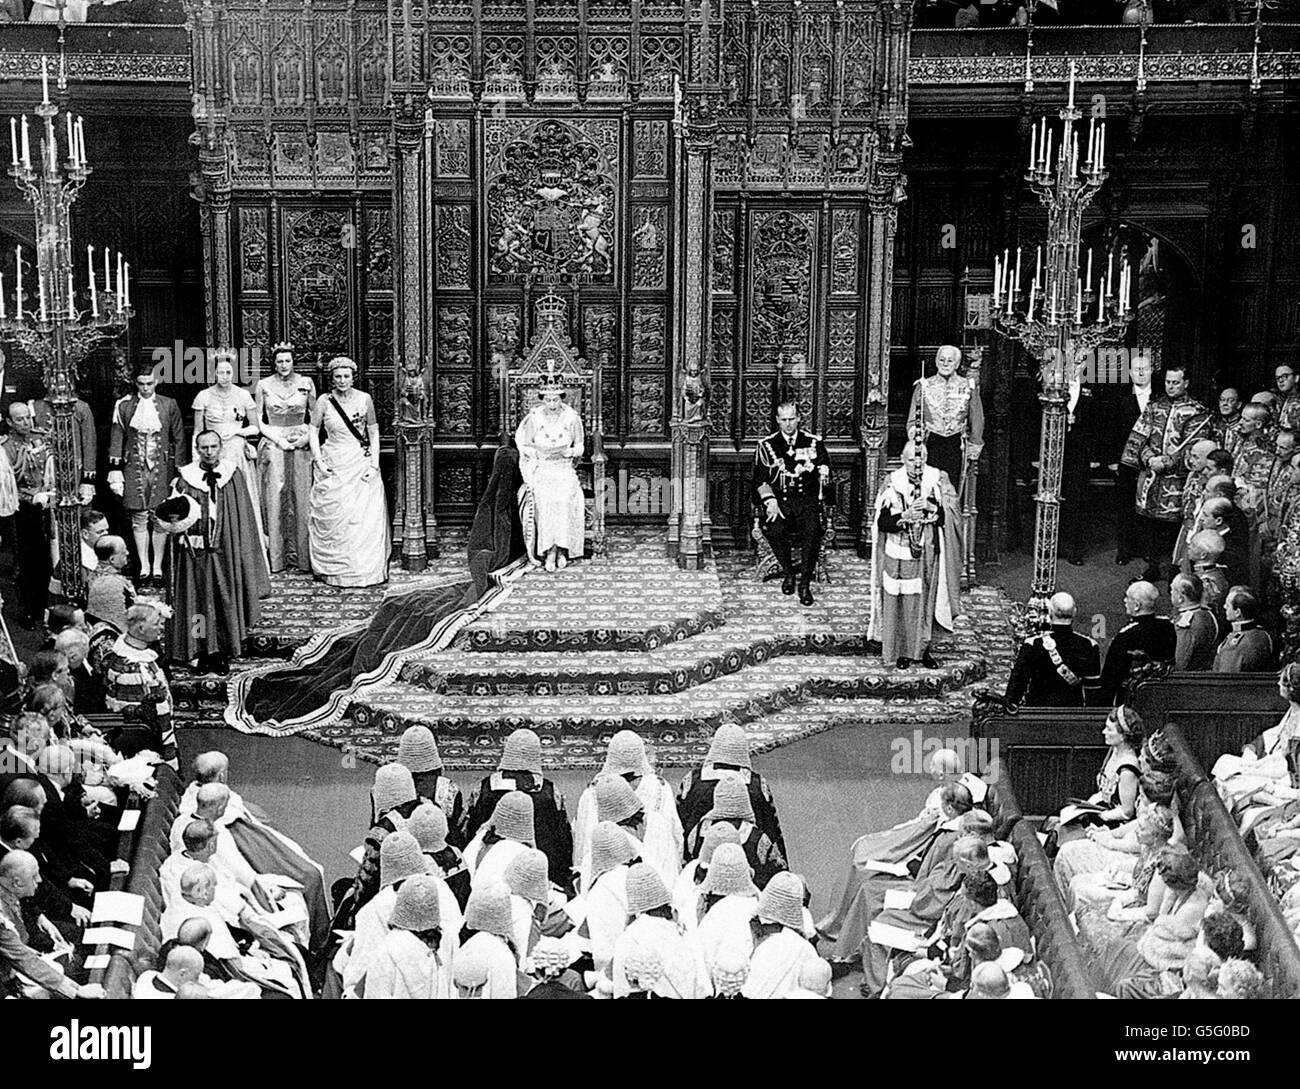 For the first time in history the Sovereign is photographed reading the Speech from the Throne in the House of Lords chamber at the State Opening of Parliament. The ceremony was also being televised for the first time. The Queen is wearing the Royal Robes and the Imperial crown. To the right is the Duke of Edinburgh wearing the uniform of the Admiral of the Fleet. Stock Photo